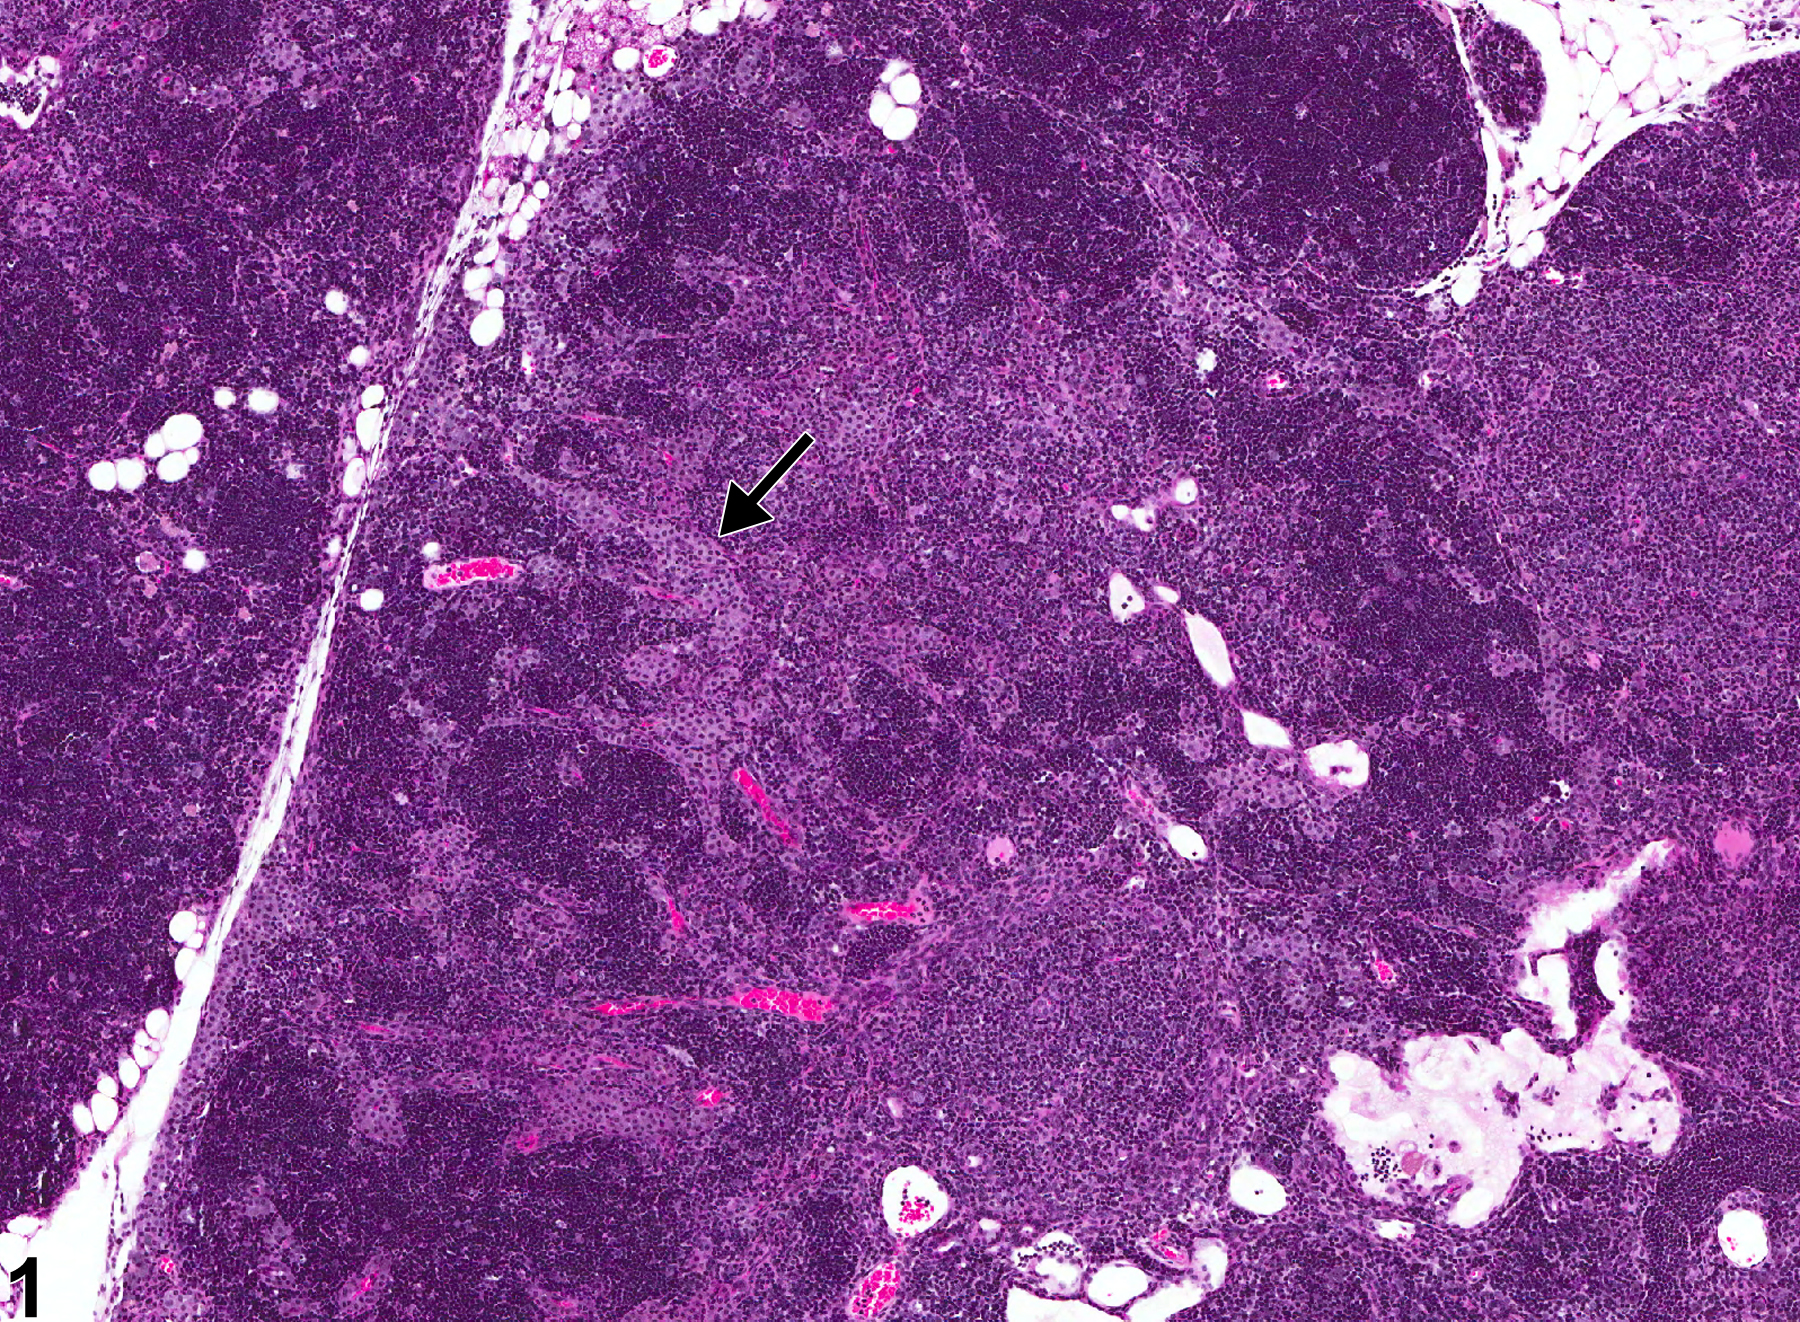 Image of hyperplasia, mast cell in the lymph node from a female B6C3F1/N mouse in a chronic study